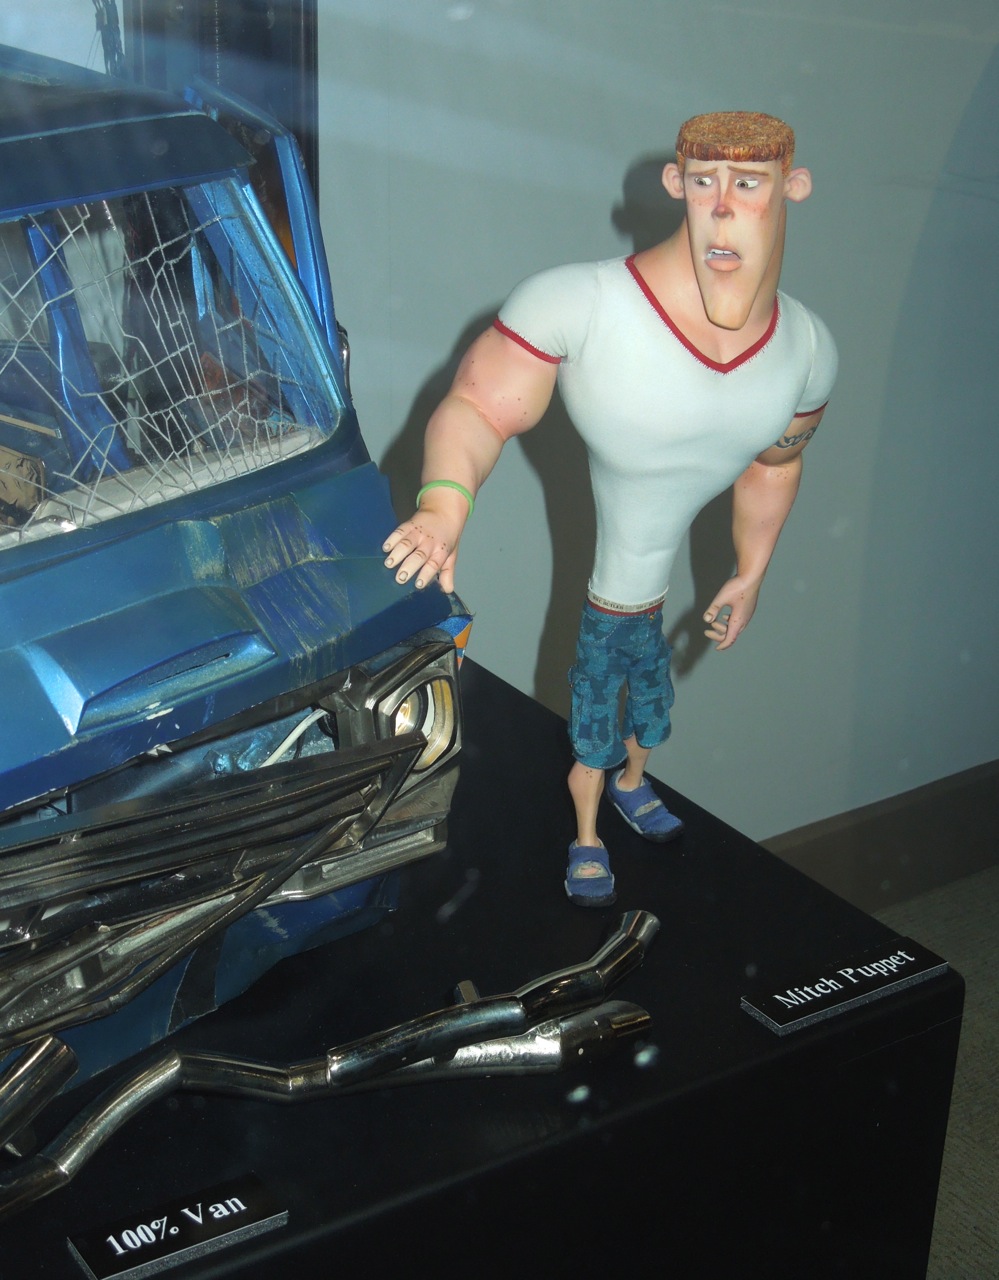 Included in the ParaNorman exhibit to examine up close were